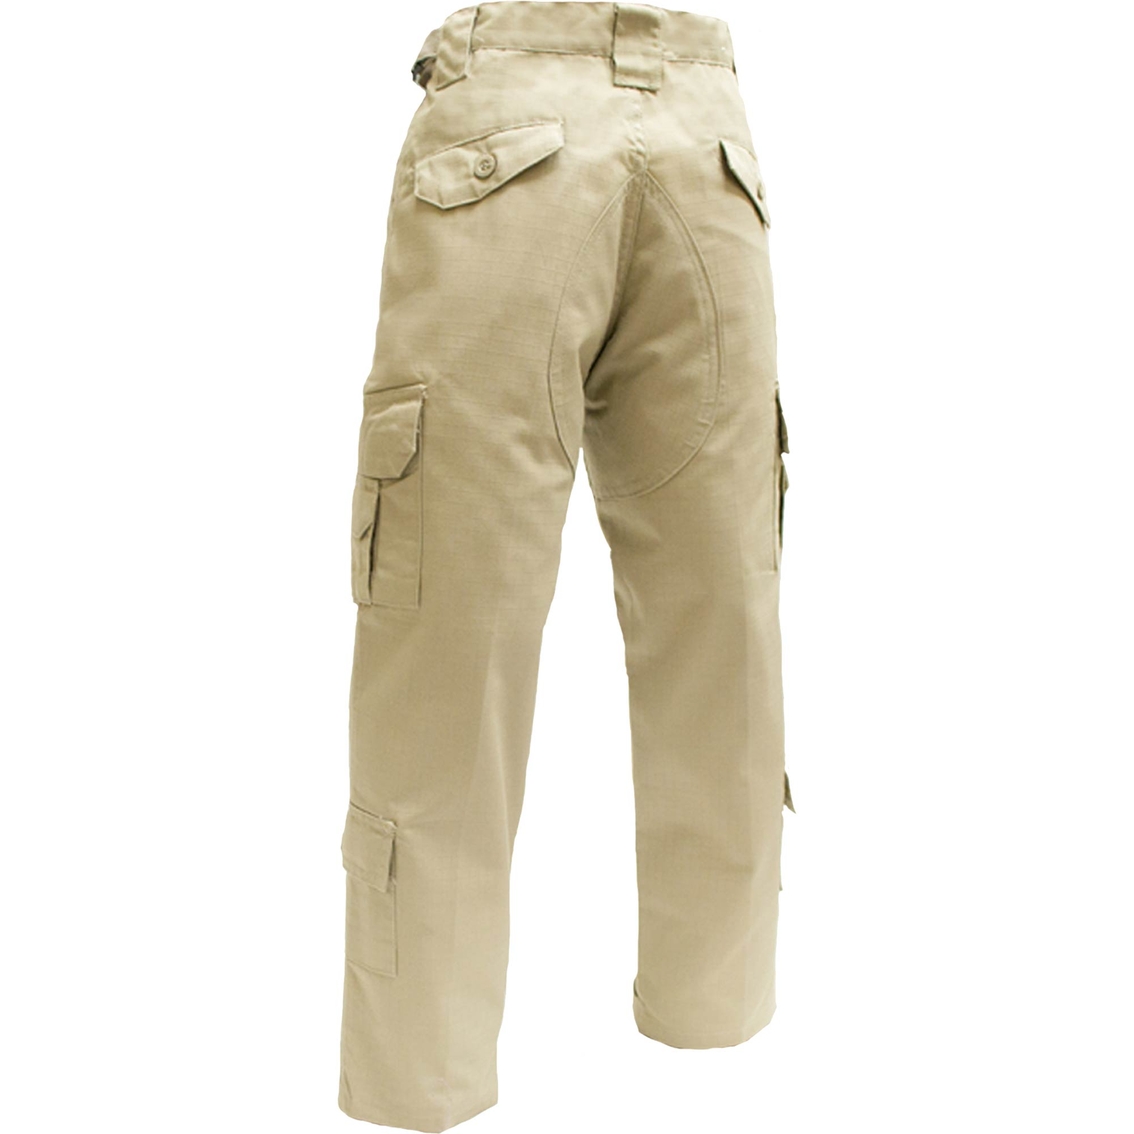 Trooper Clothing Kids Tactical Pants | Boys 8-20 | Clothing ...